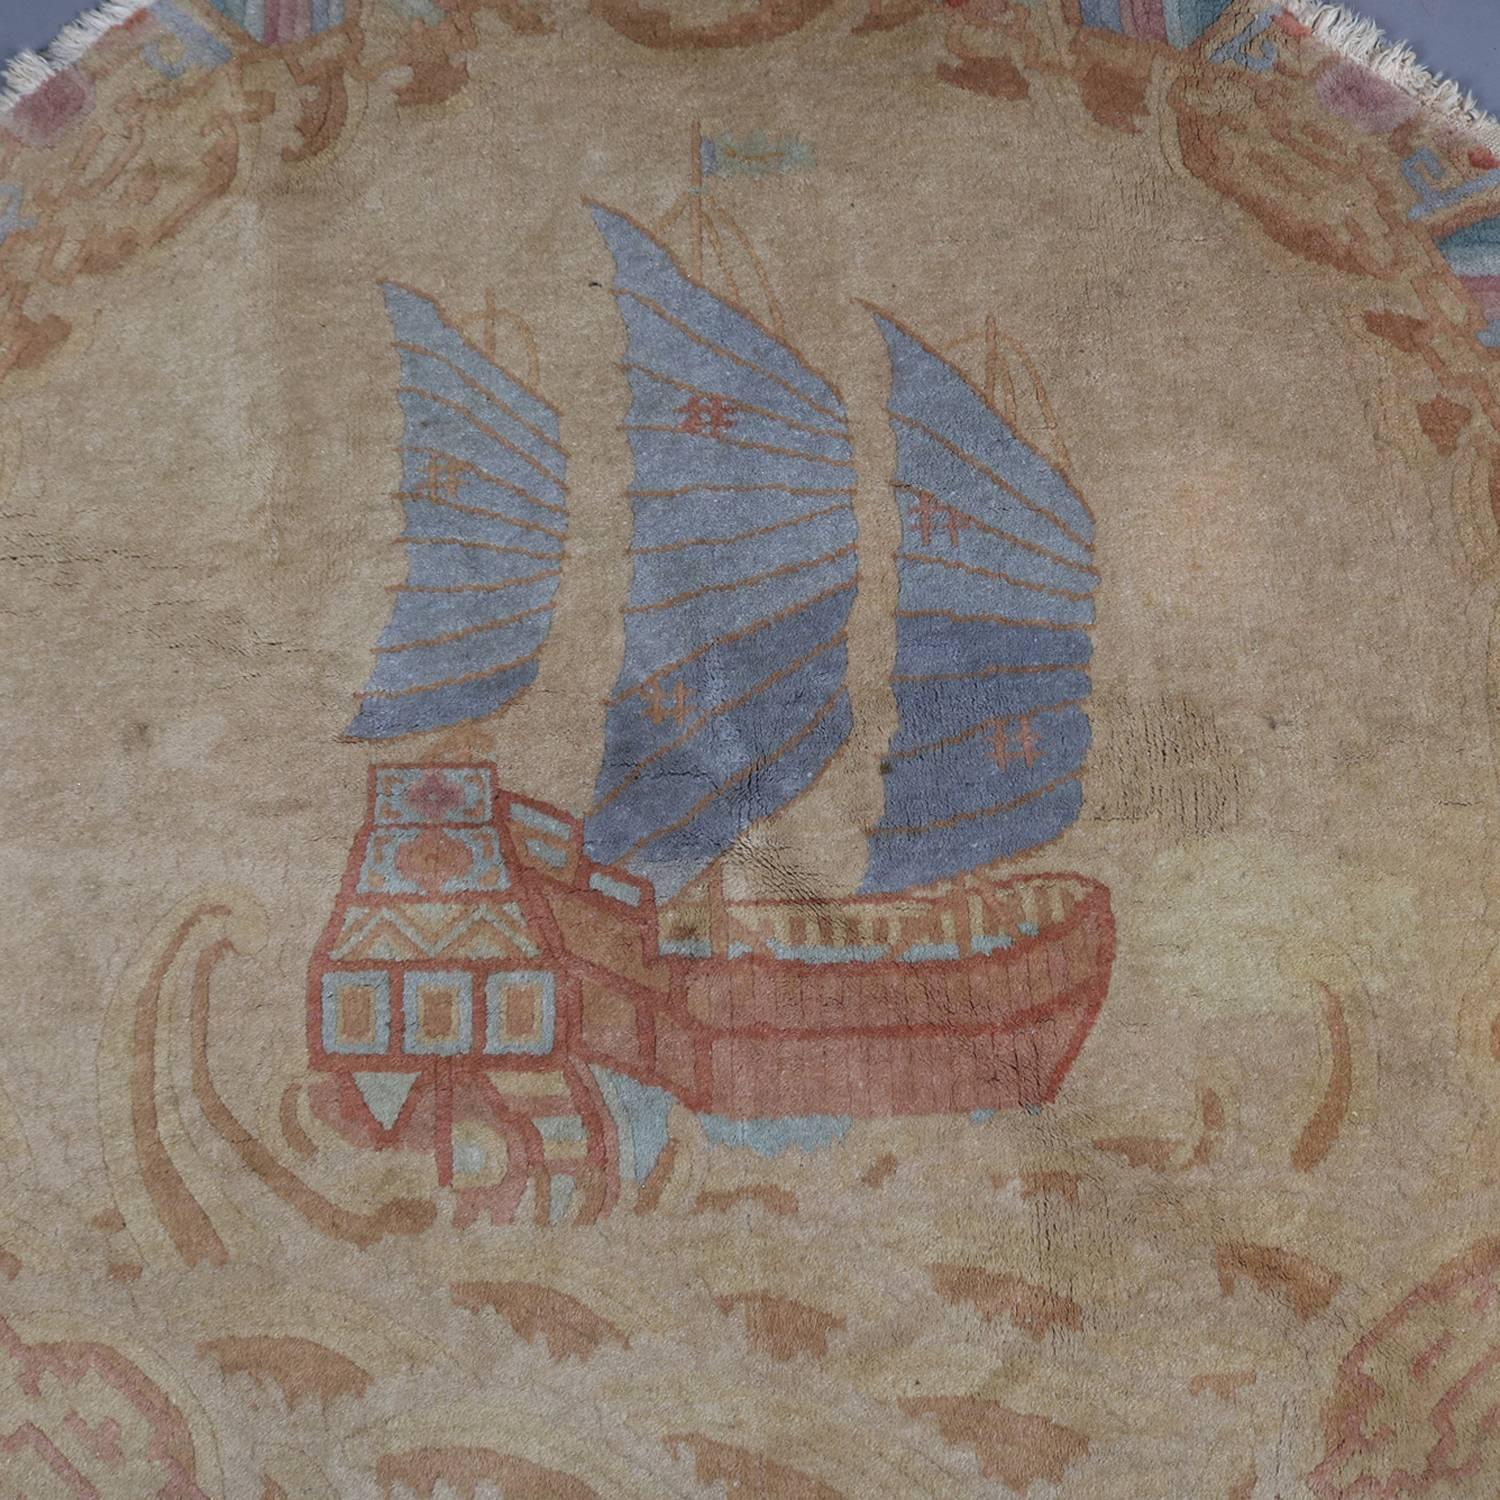 Antique Chinese Nichols round mat with maritime seascape scene with junket sailing cargo ship, circa 1920

Measures: 48